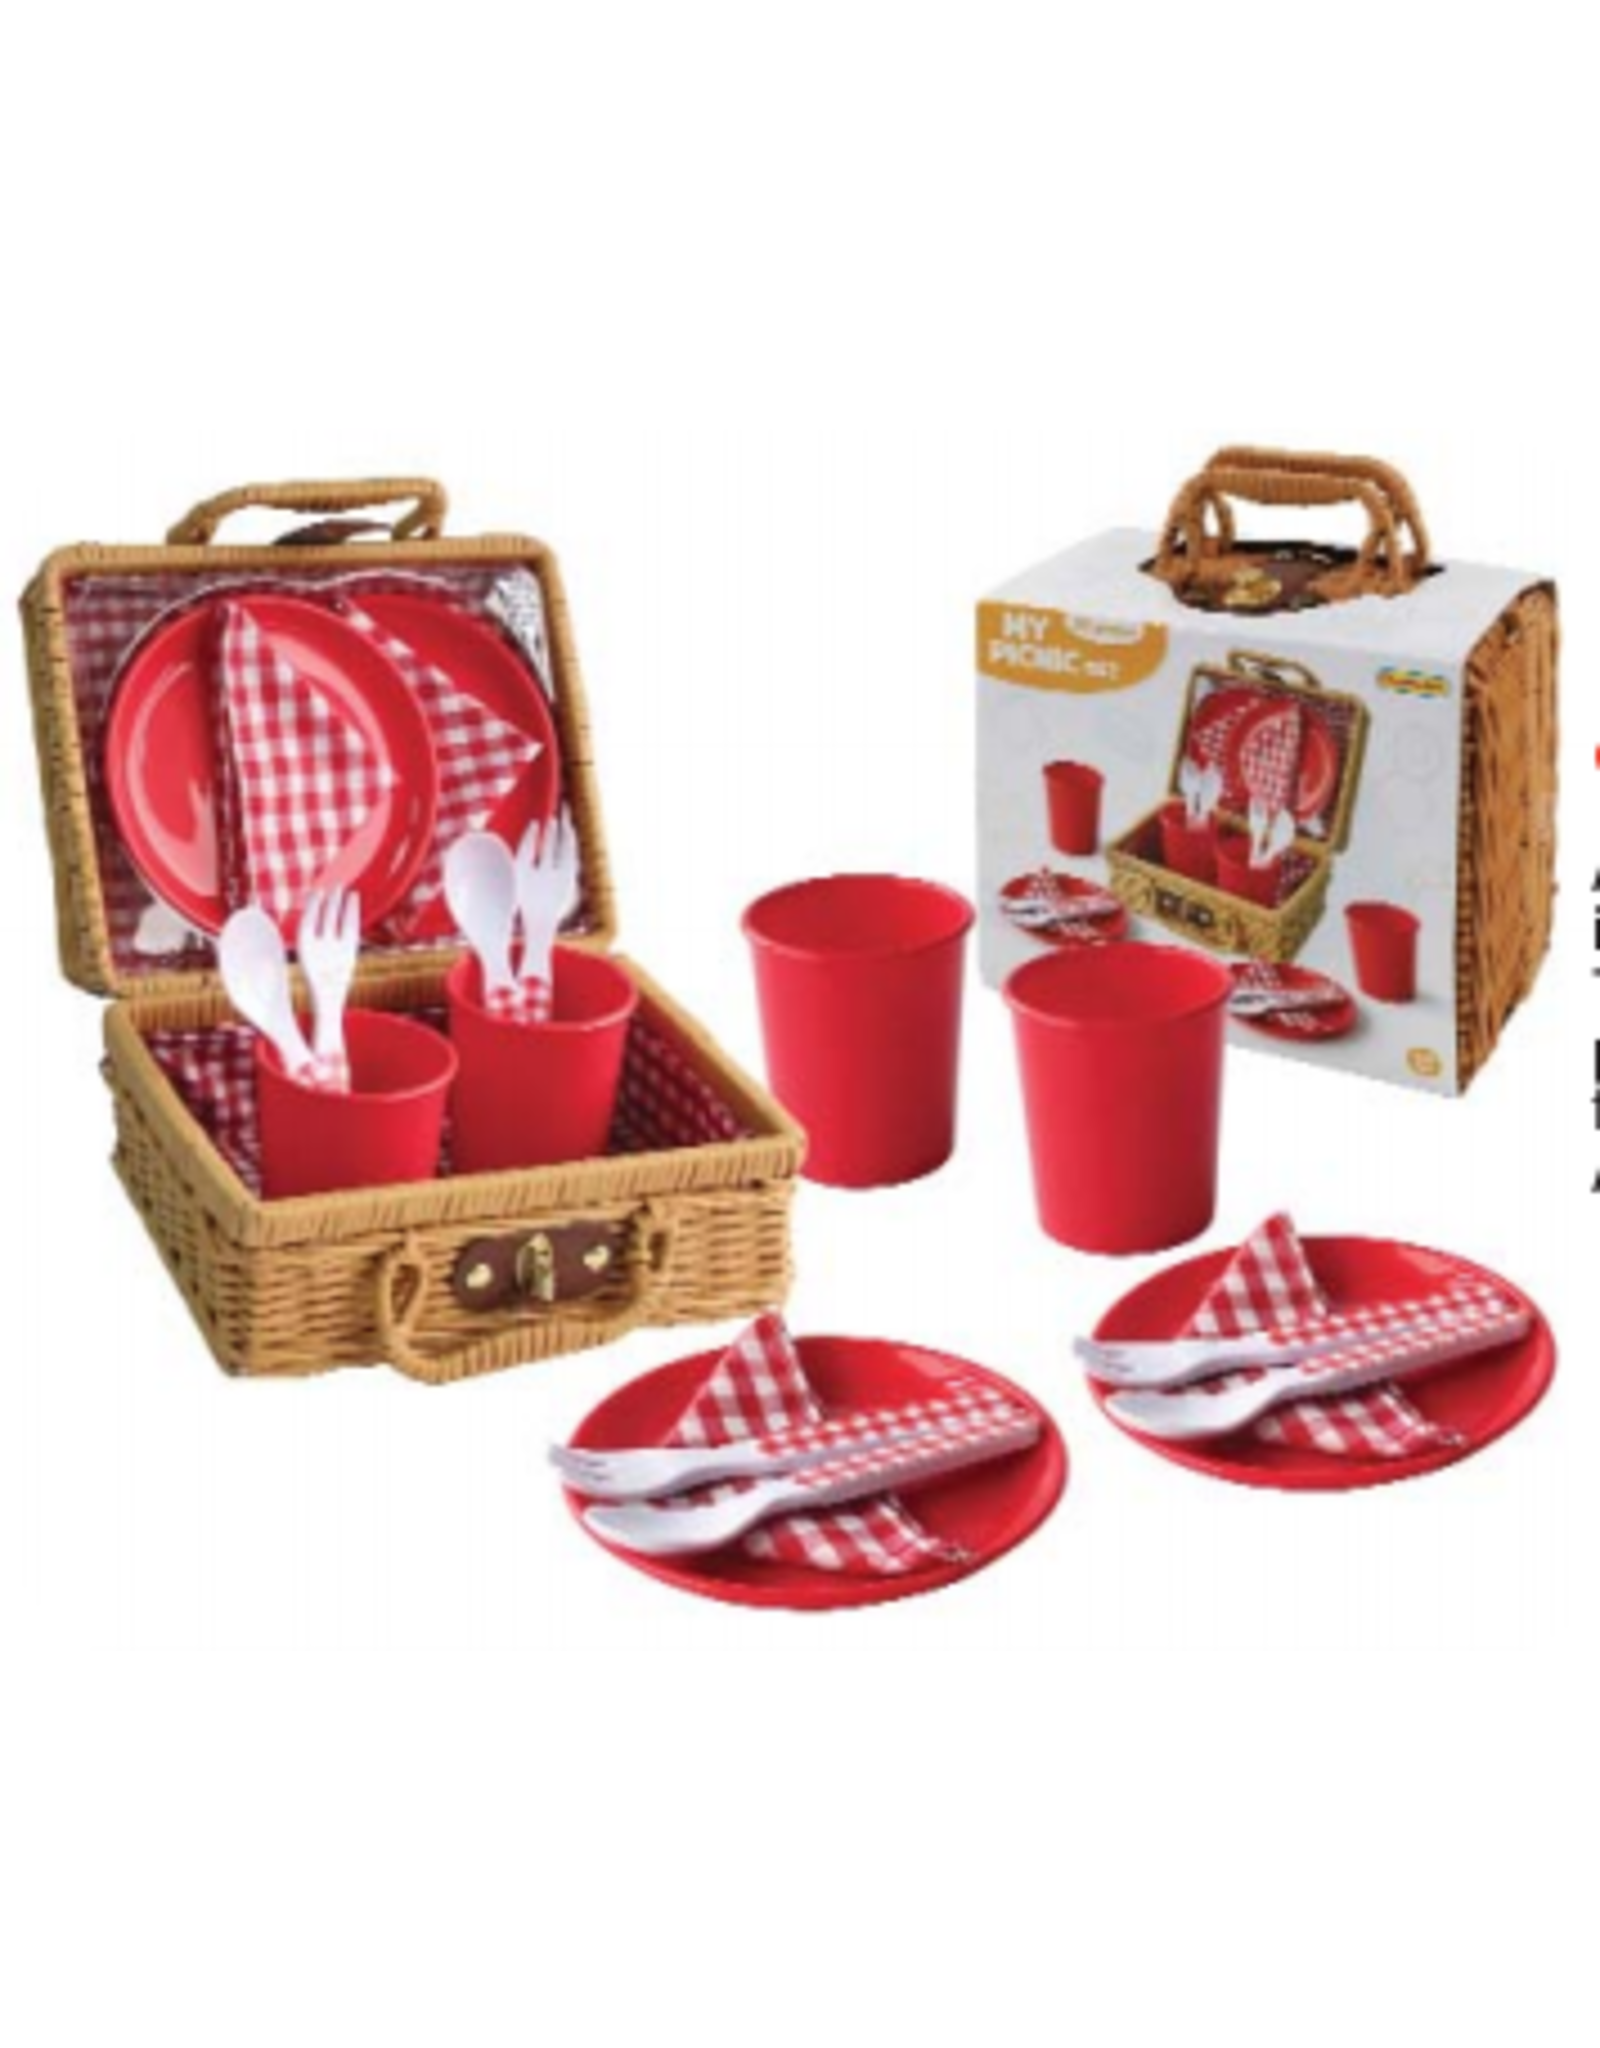 Playwell Picnic Set in Carry Case